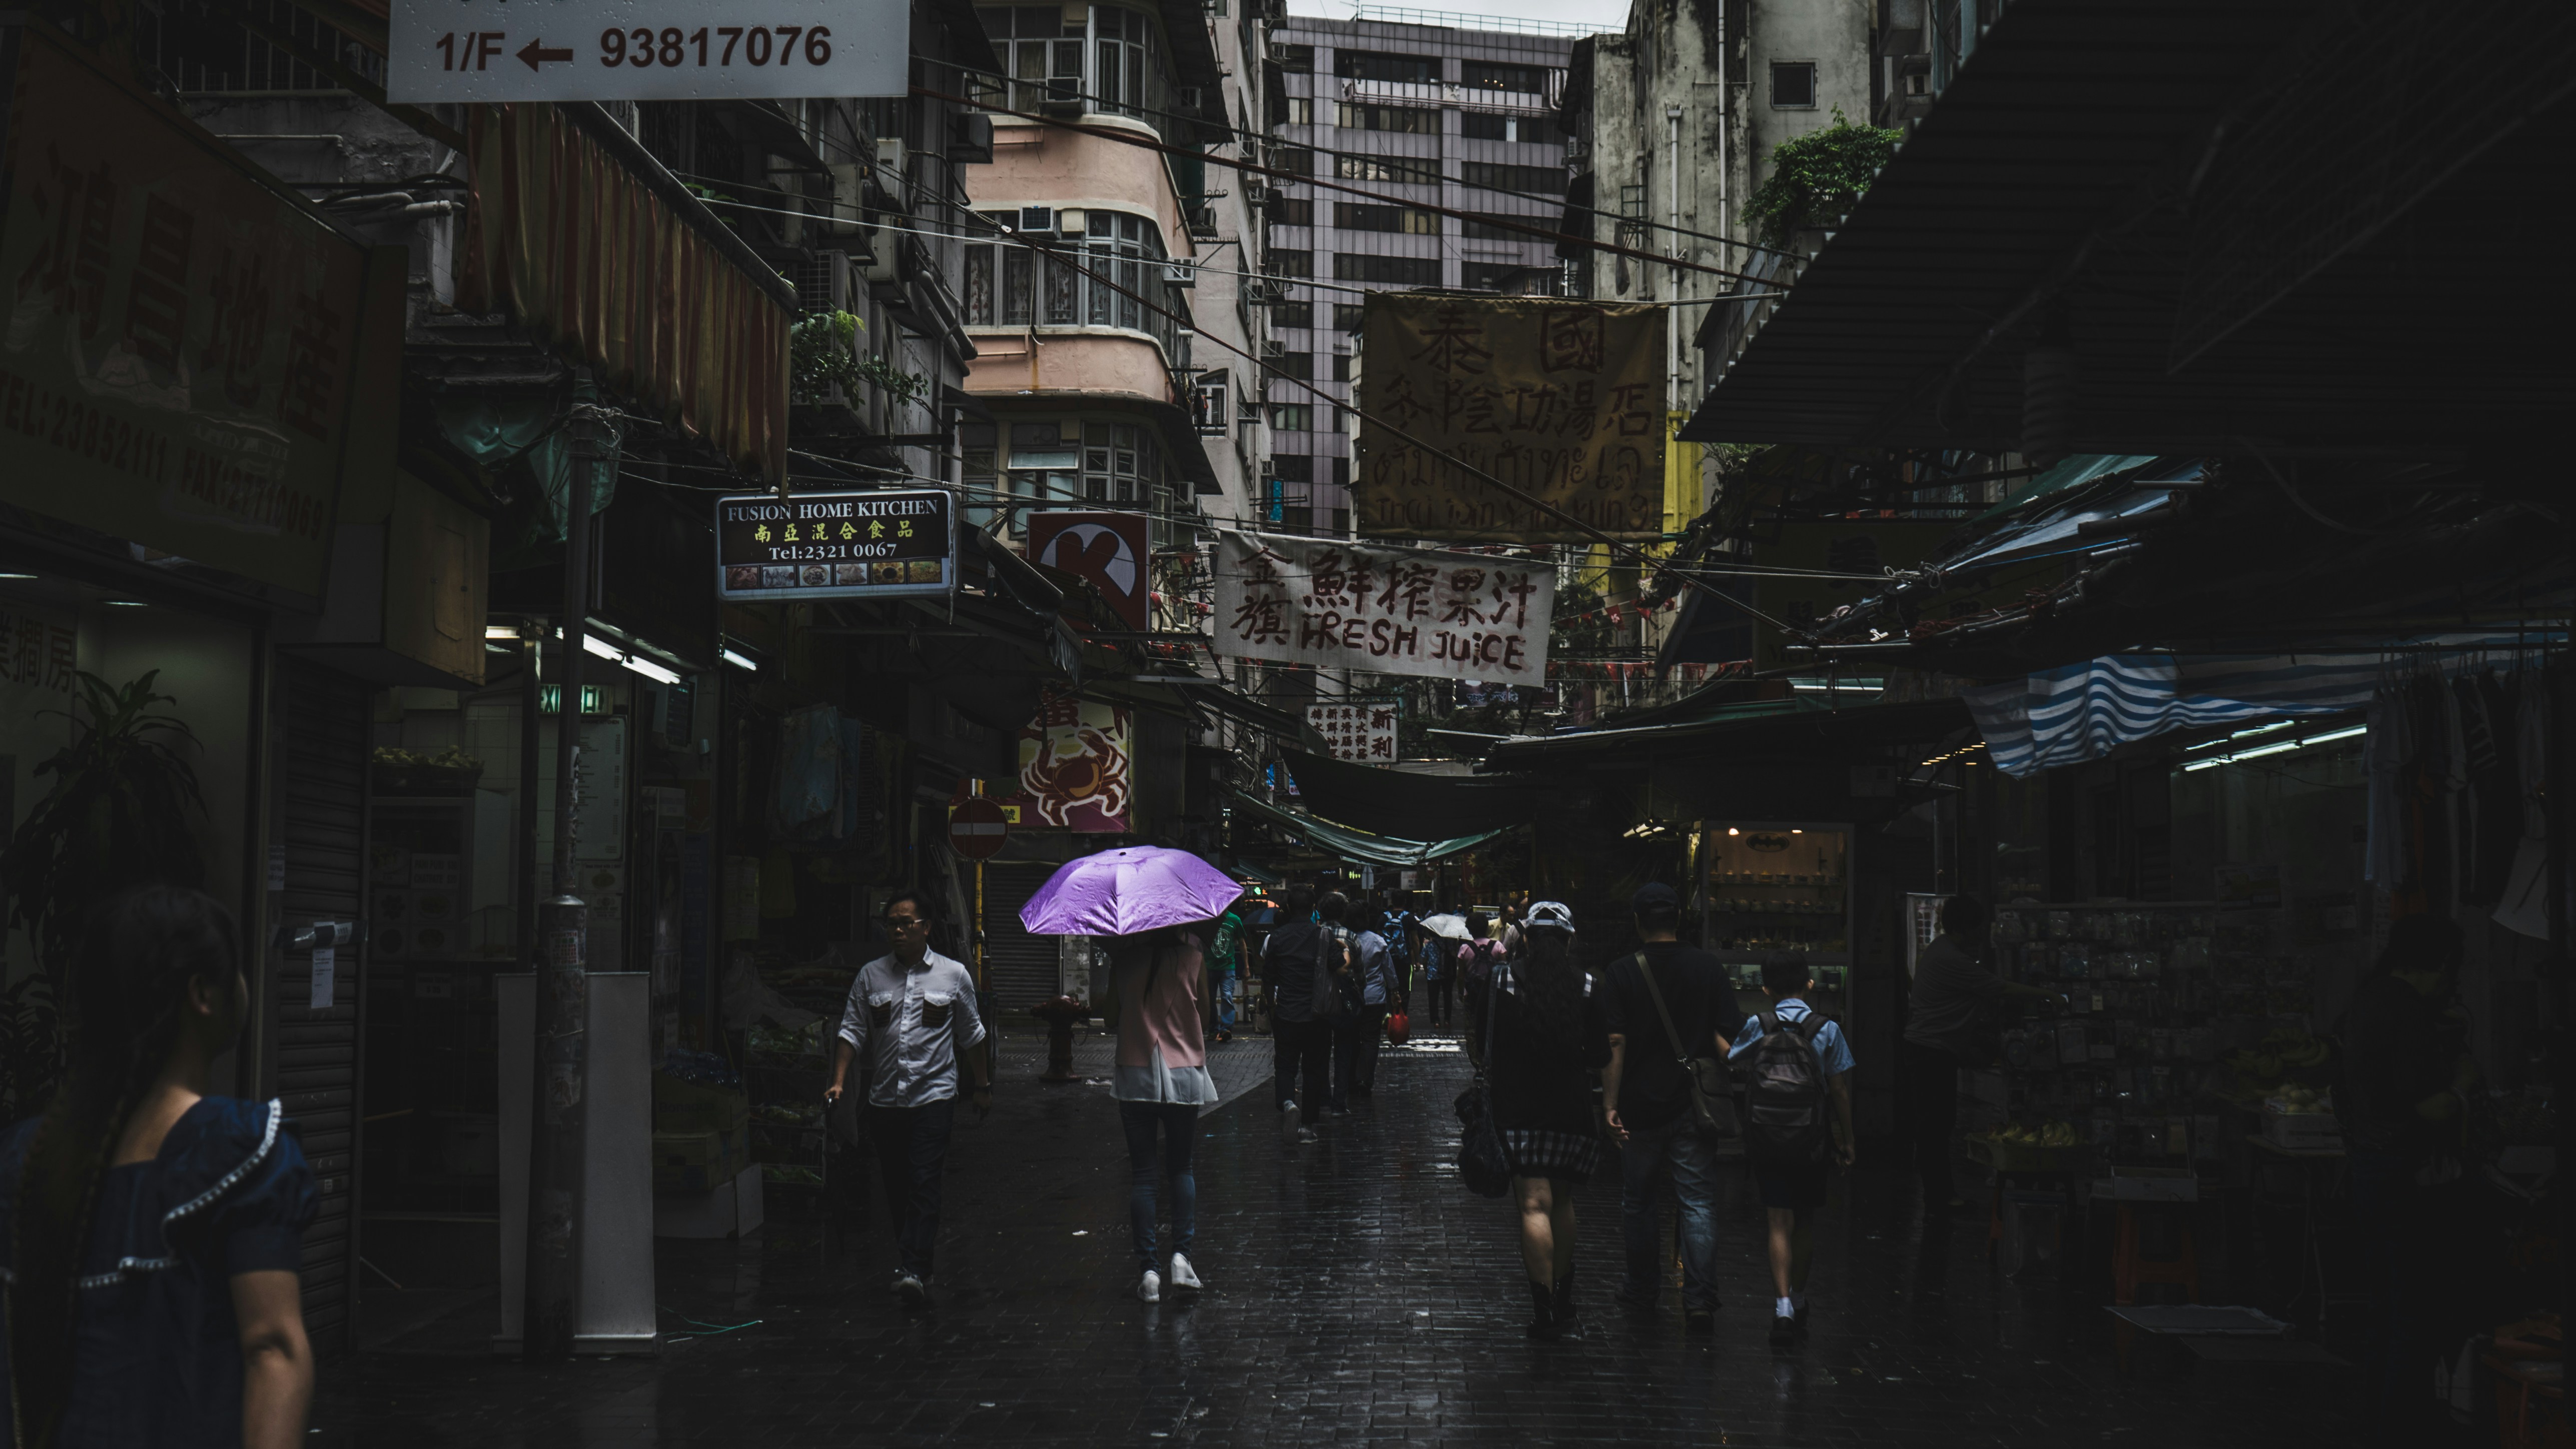 Rainy day in a Kowloon alley